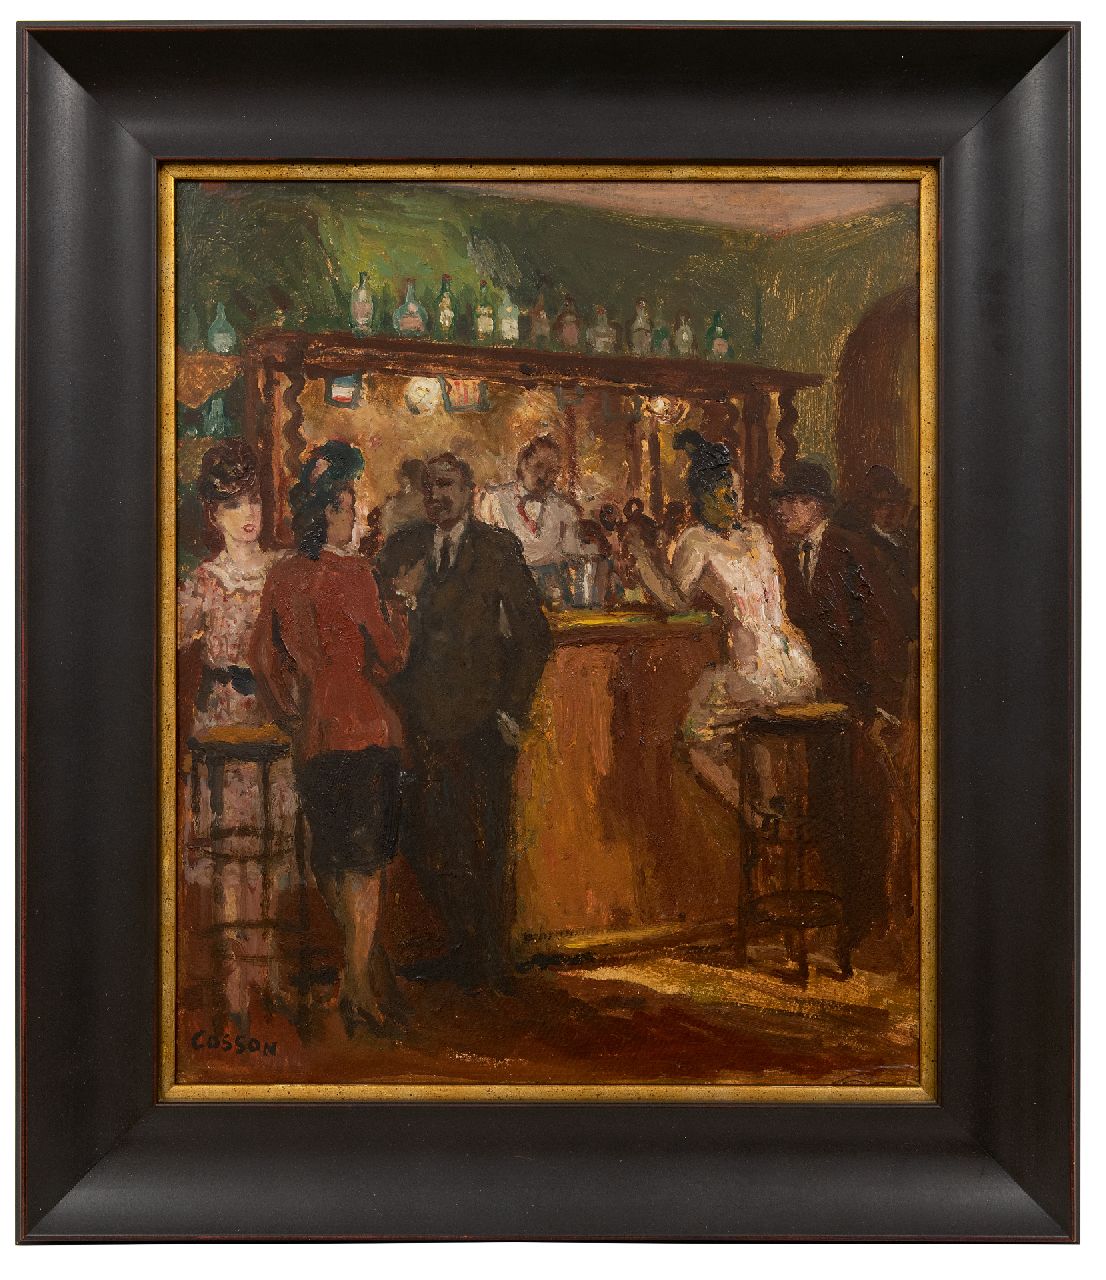 Cosson J.L.M.  | Jean Louis 'Marcel' Cosson | Paintings offered for sale | Bar scene, oil on board 46.0 x 38.0 cm, signed l.l.